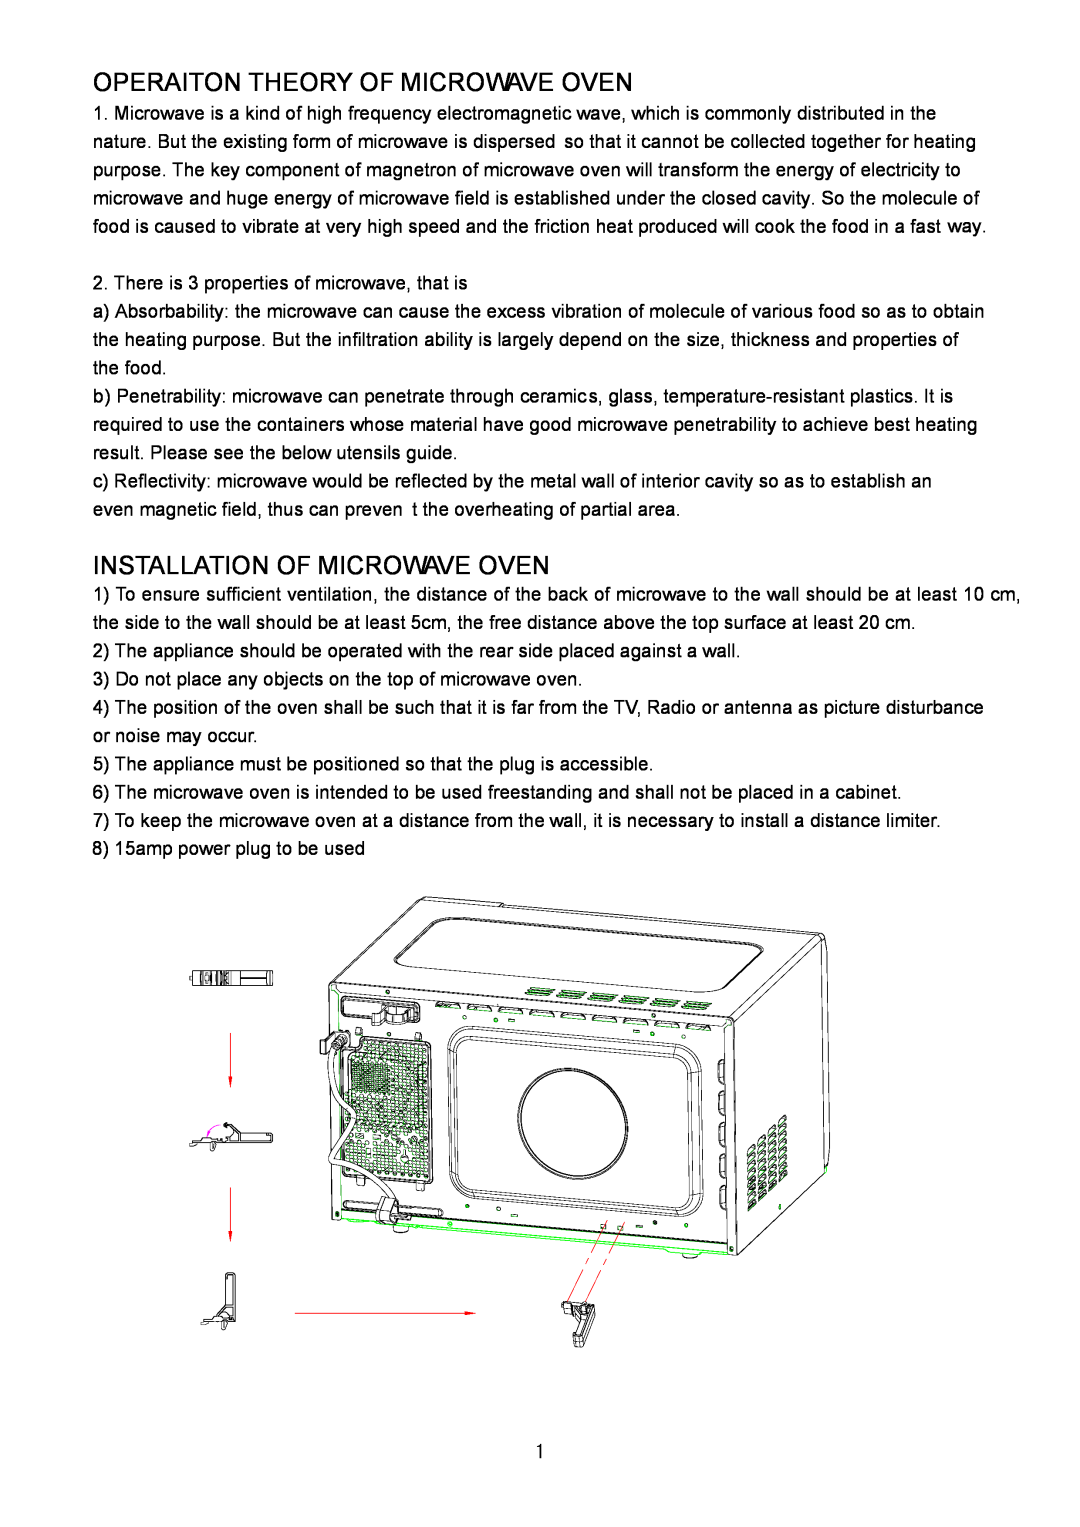 Haier HIL 2810EGCB manual Operaiton Theory Of Microwave Oven, Installation Of Microwave Oven 